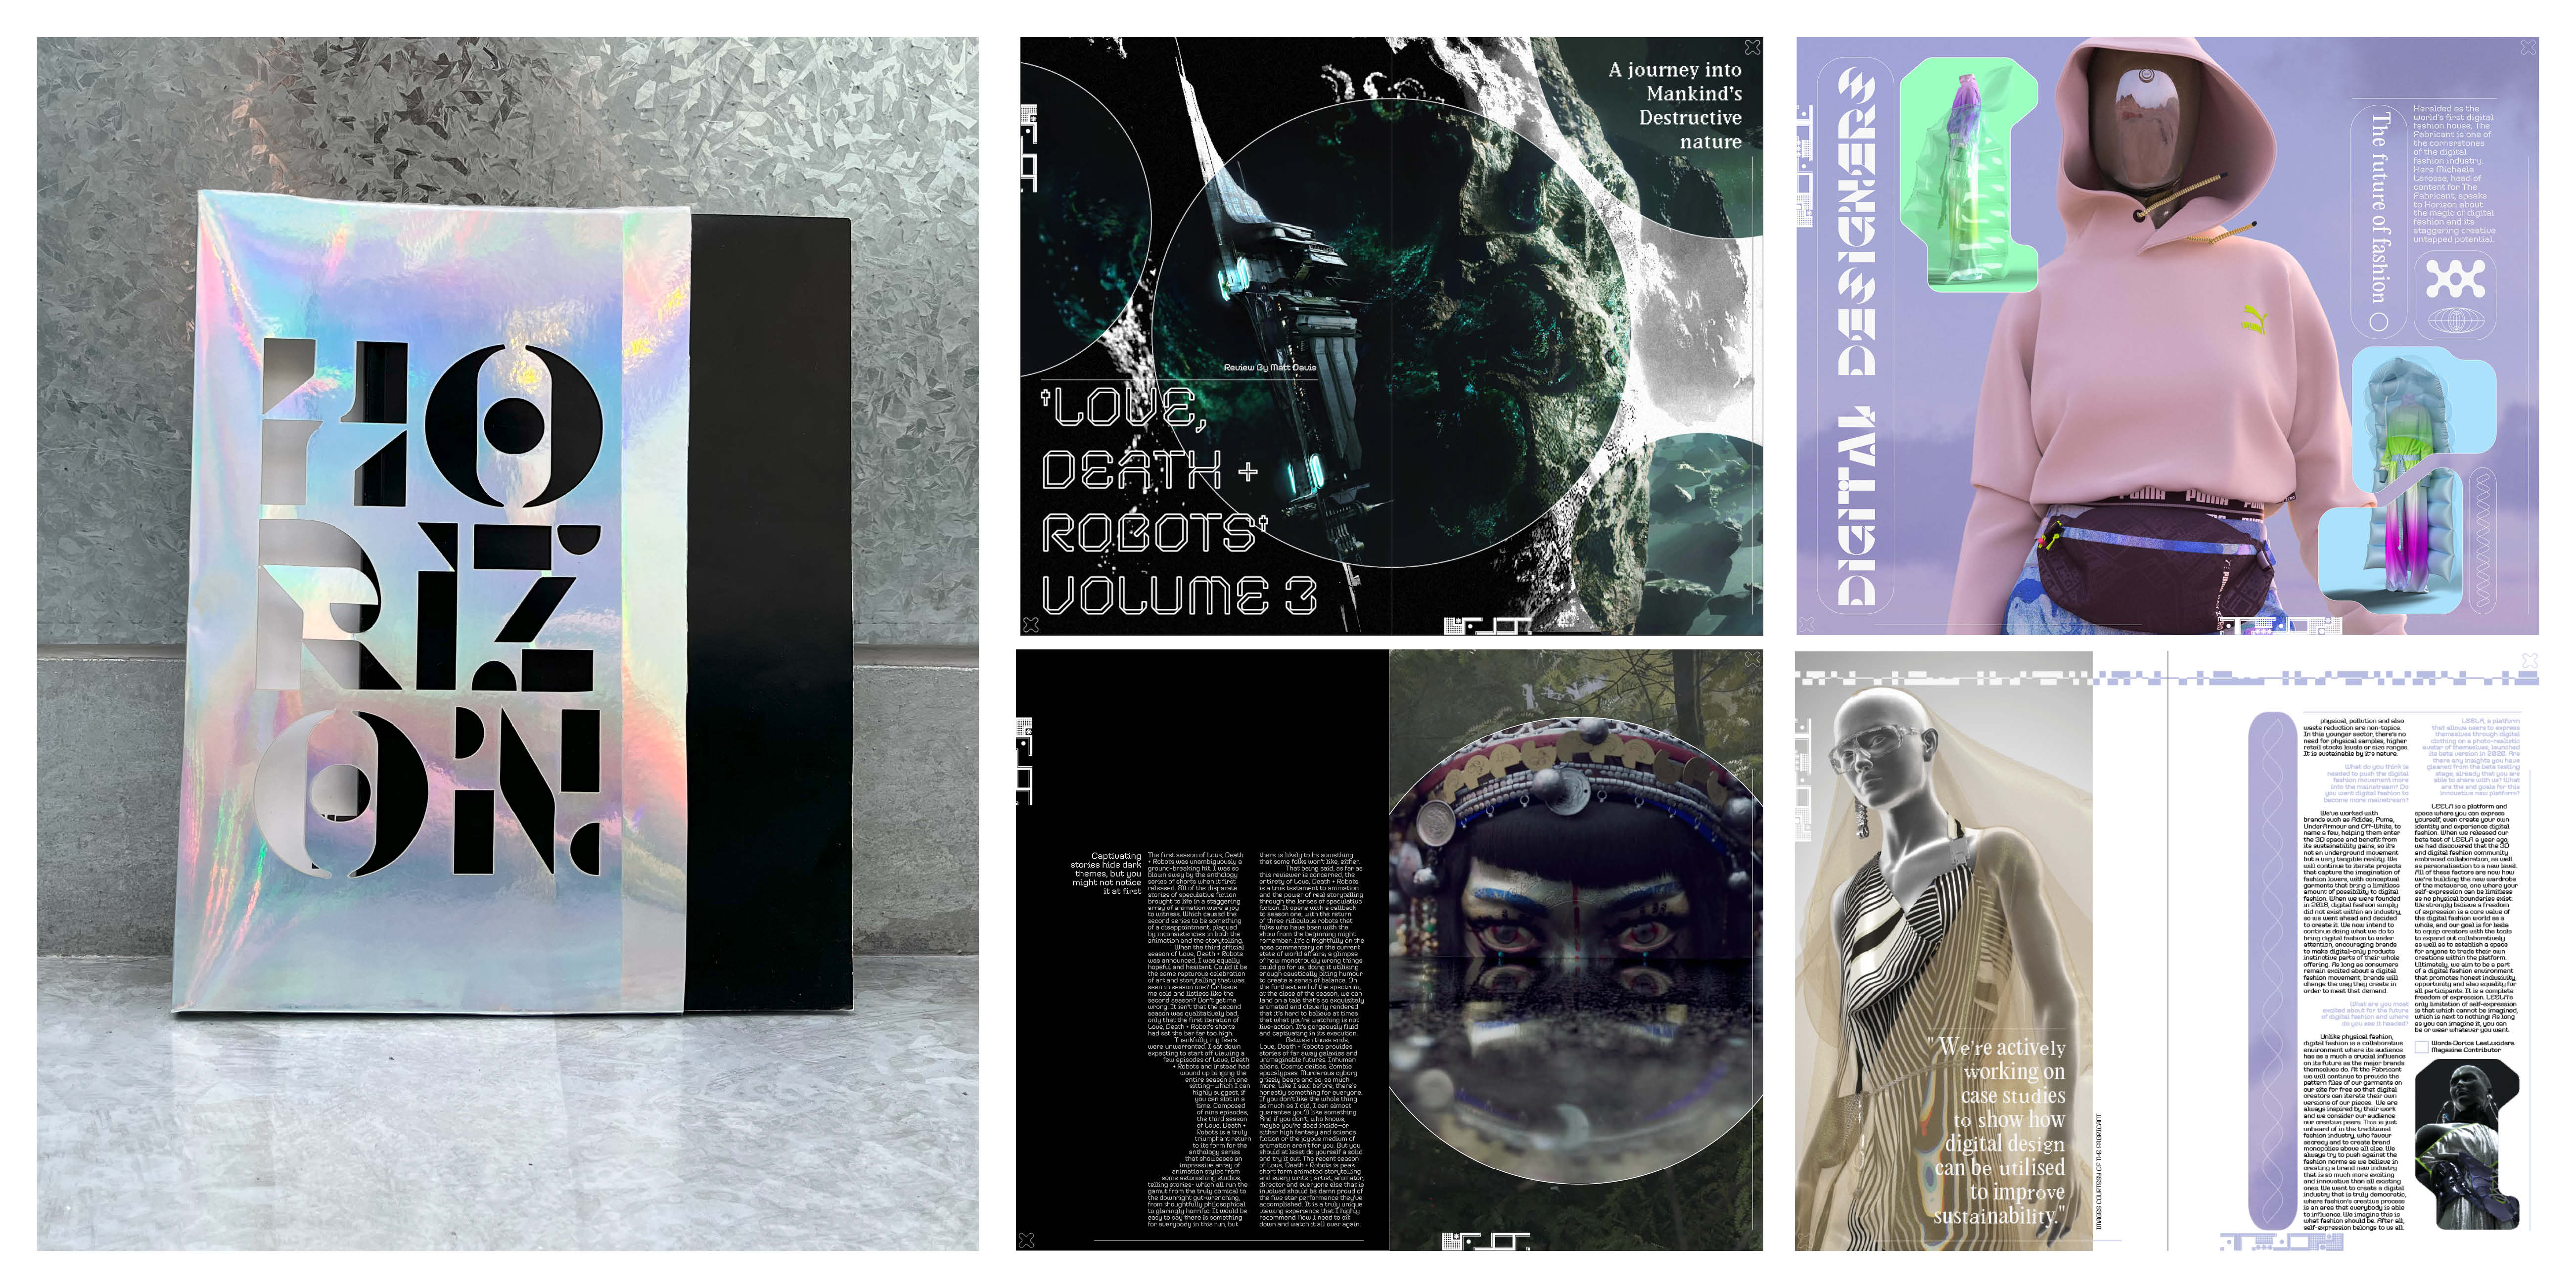 A series of images surrounding The Horizon magazine project, including a holographic slip case cover and two article designs on fashion and television.